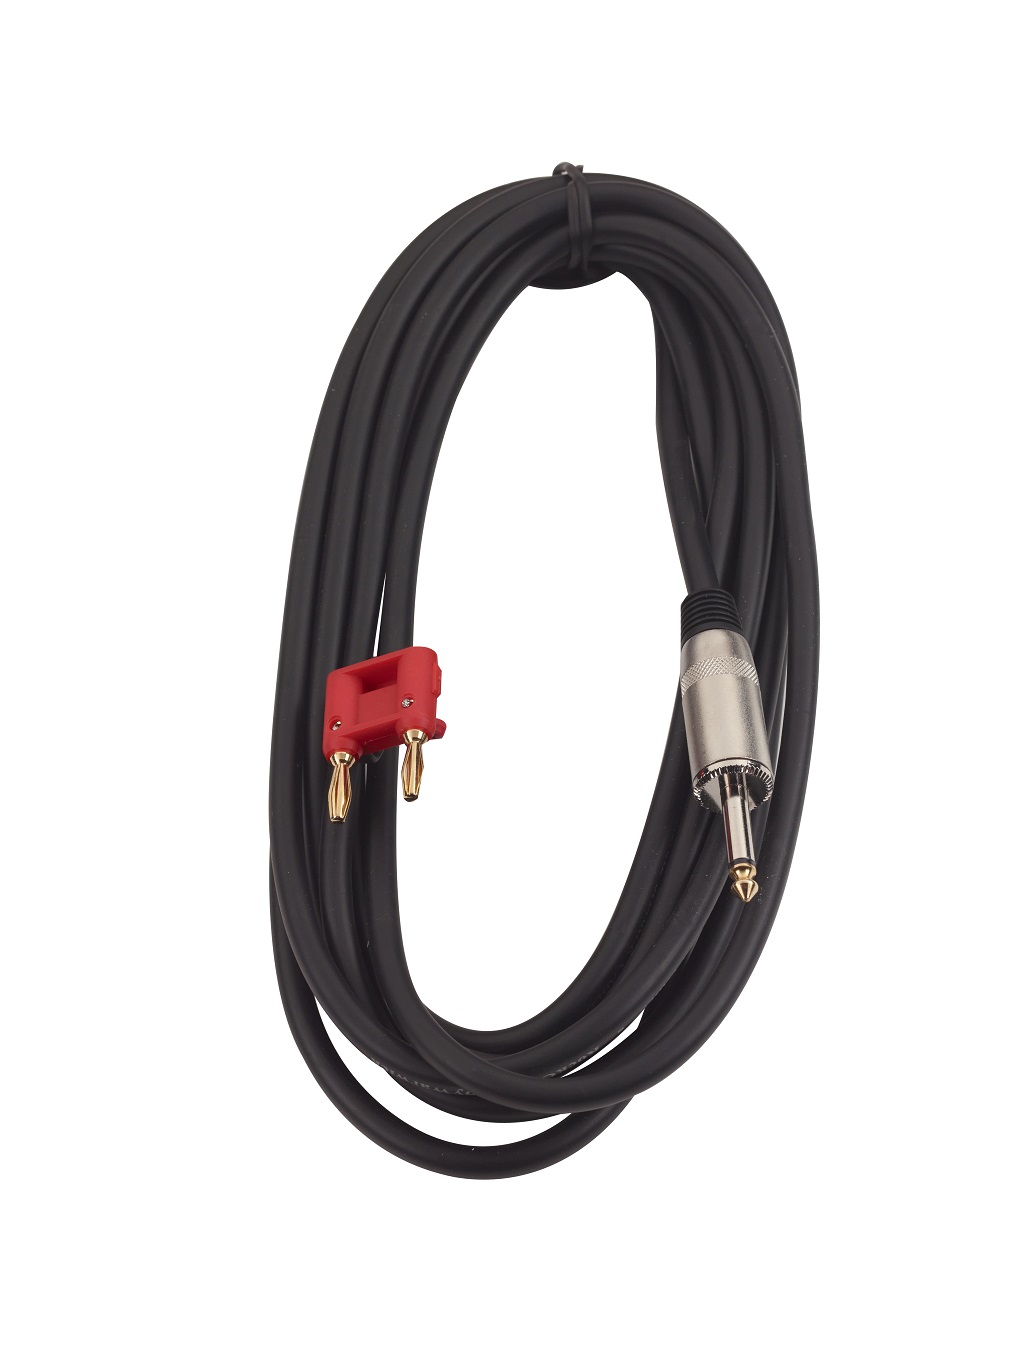 RockCable Speaker Cable - Banana Plug (4 mm) / Straight TS (6.3 mm / 1/4") - 5 m / 16.4 ft